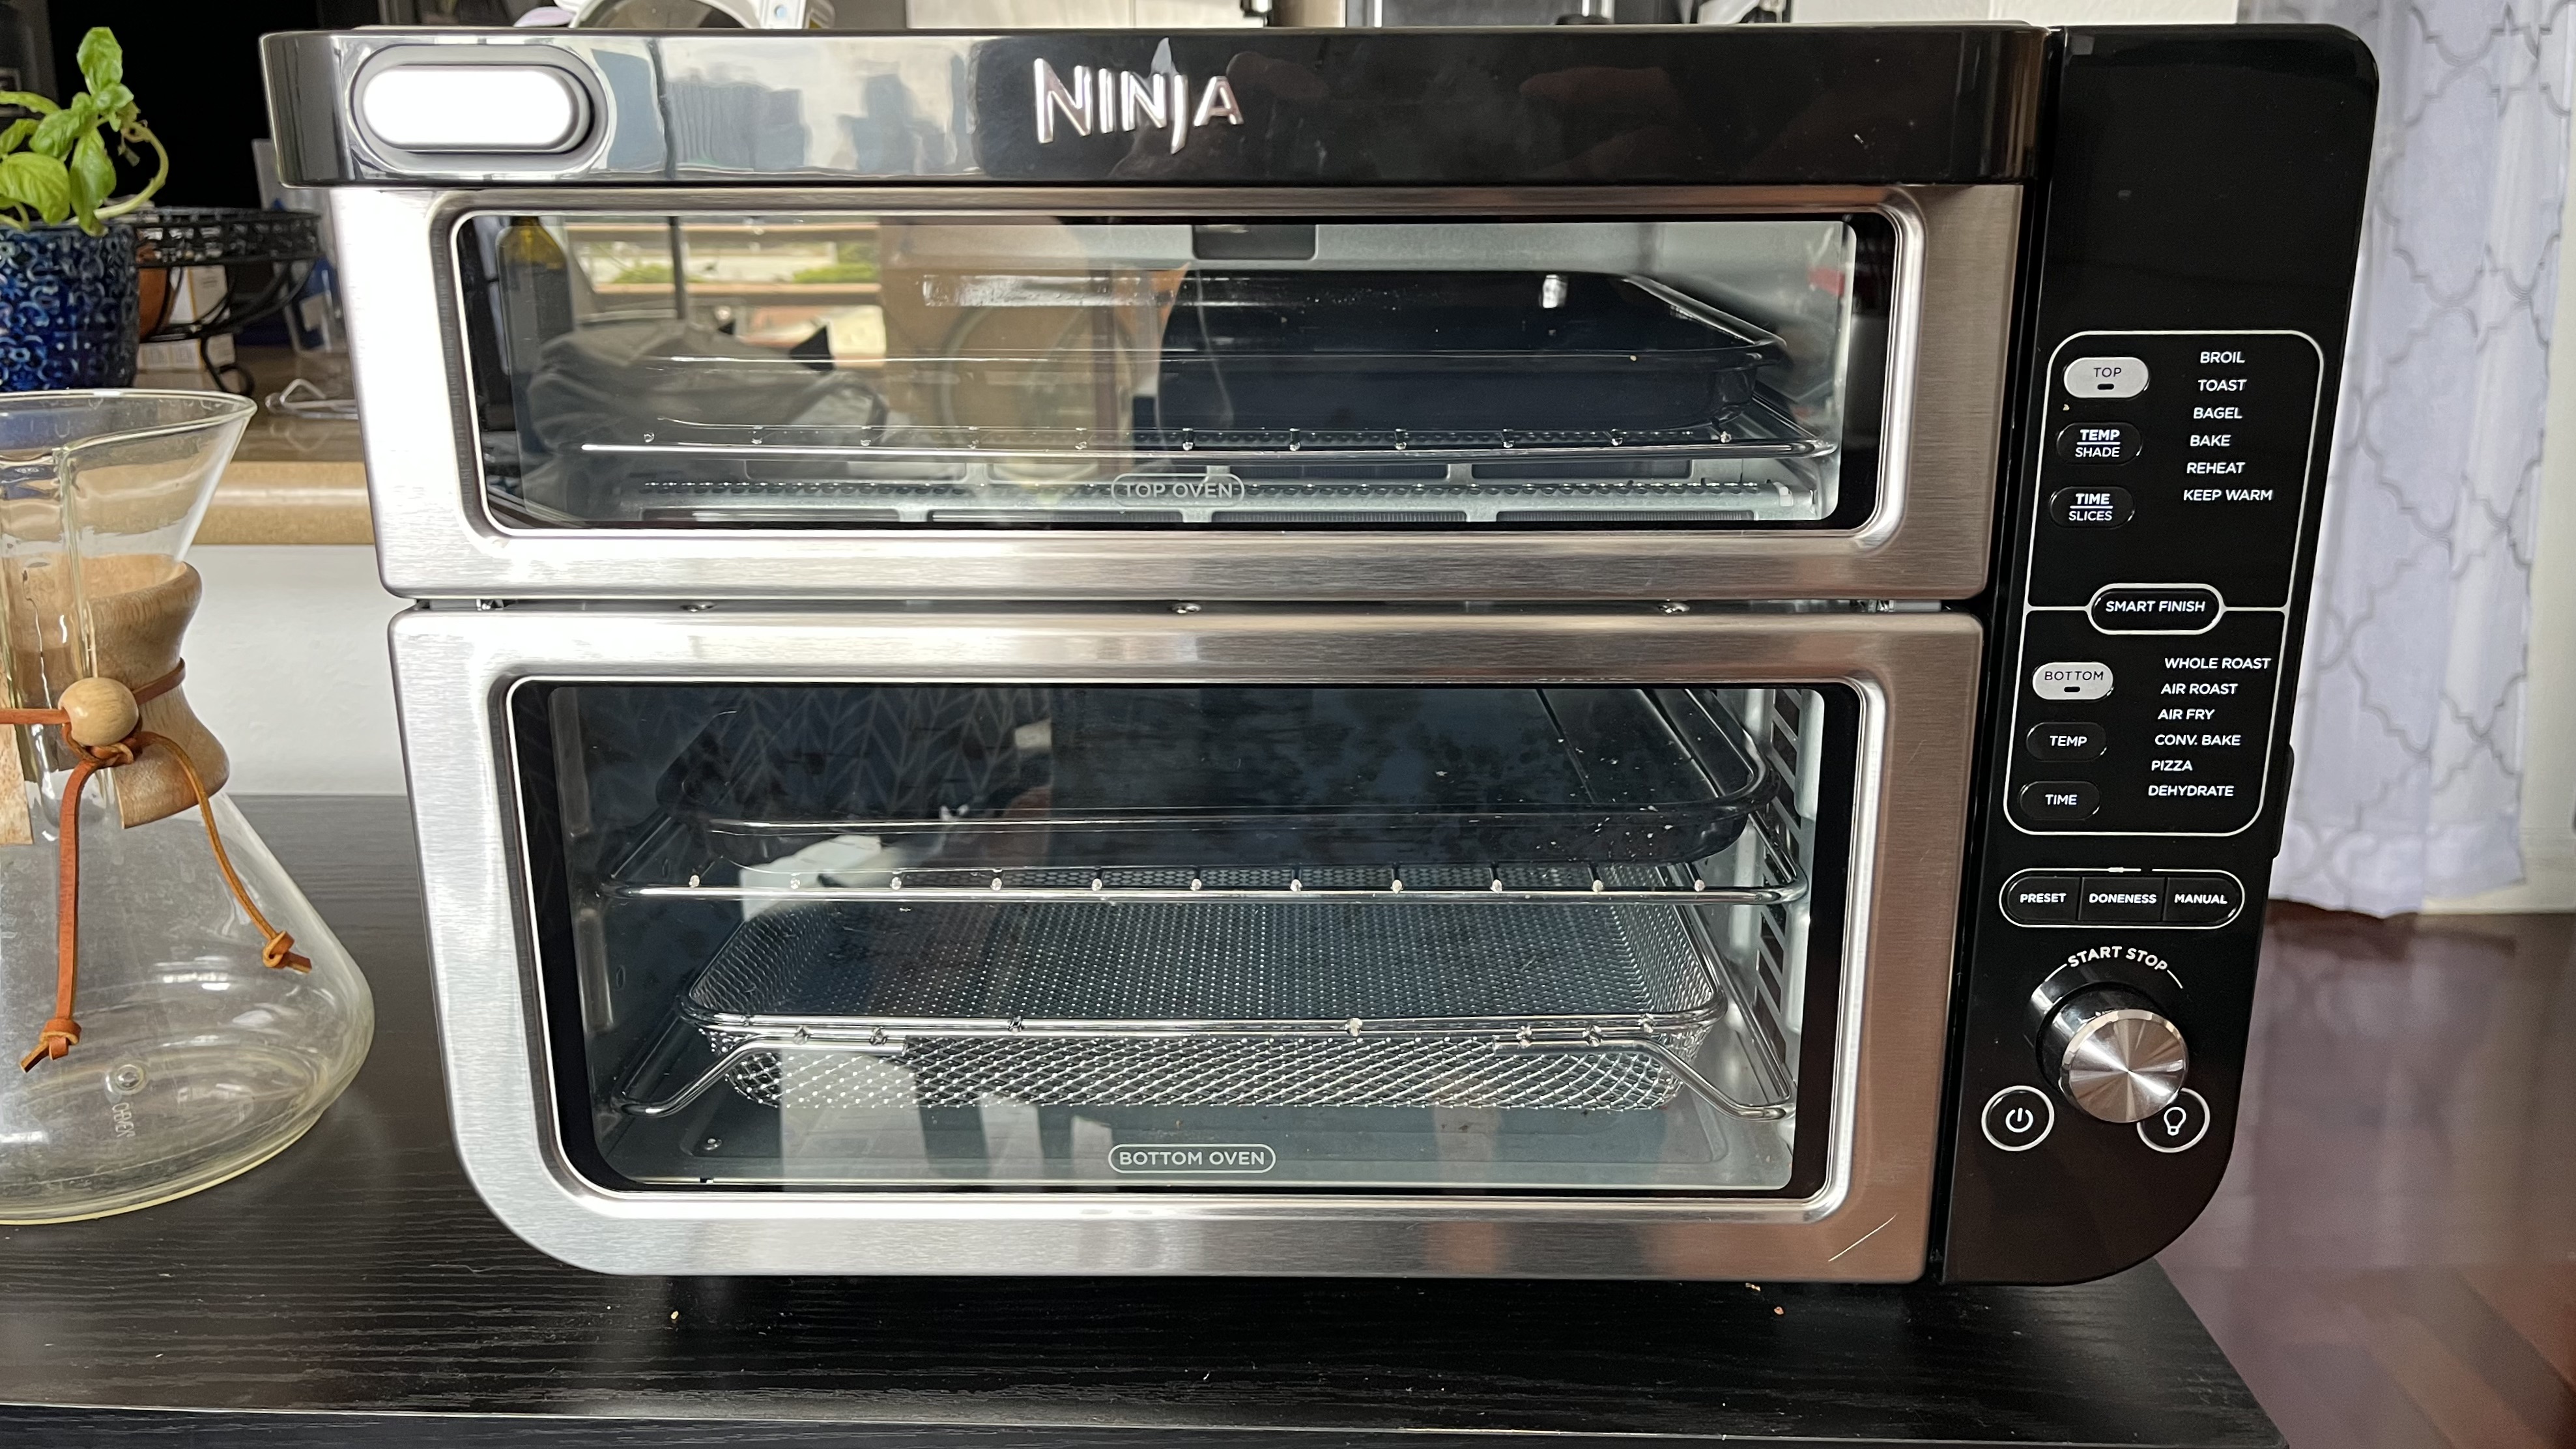 Ninja Double Oven air fryer review: a high-performing, roomy air